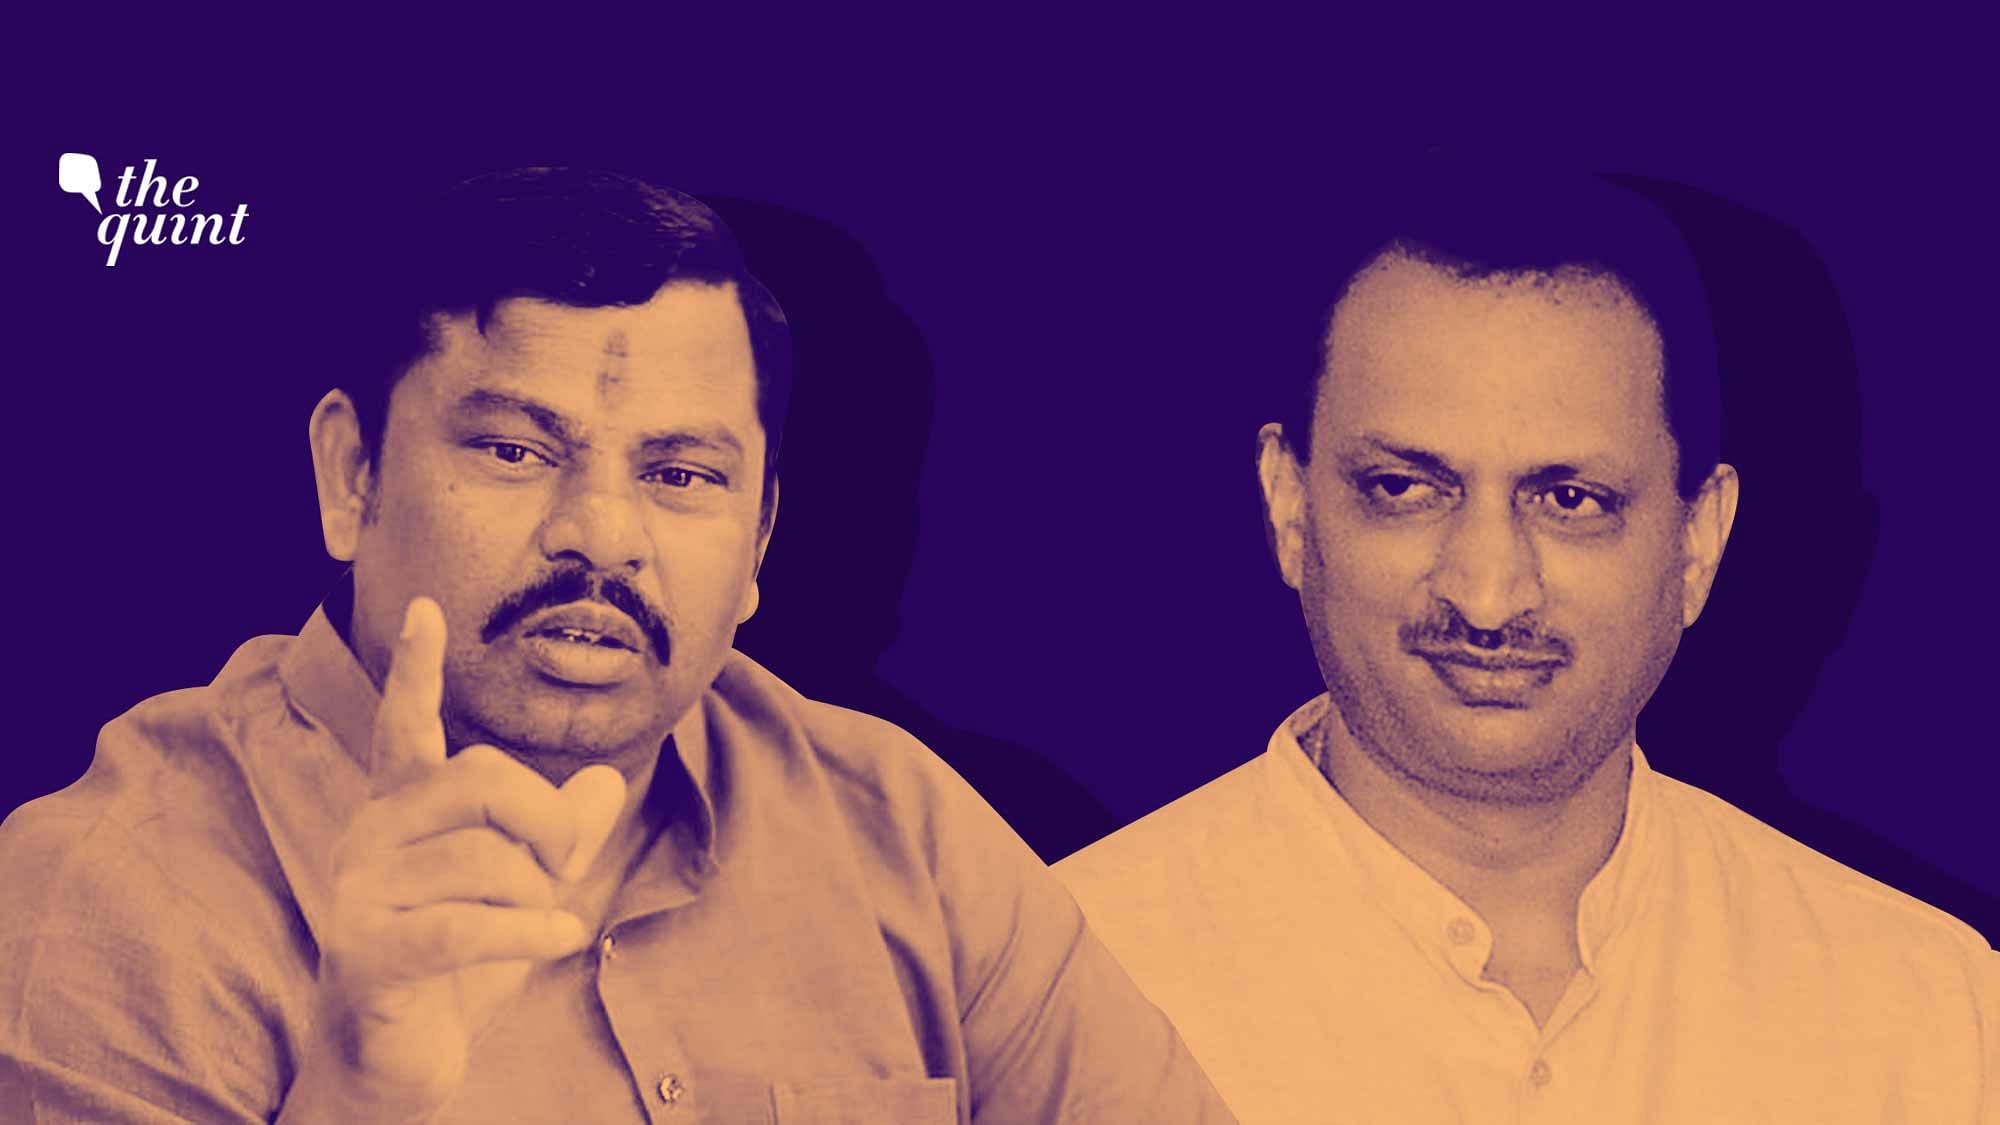 Anantkumar Hegde’s and Raja Singh’s posts were flagged under the “Dangerous Individuals and Organisations” policy.